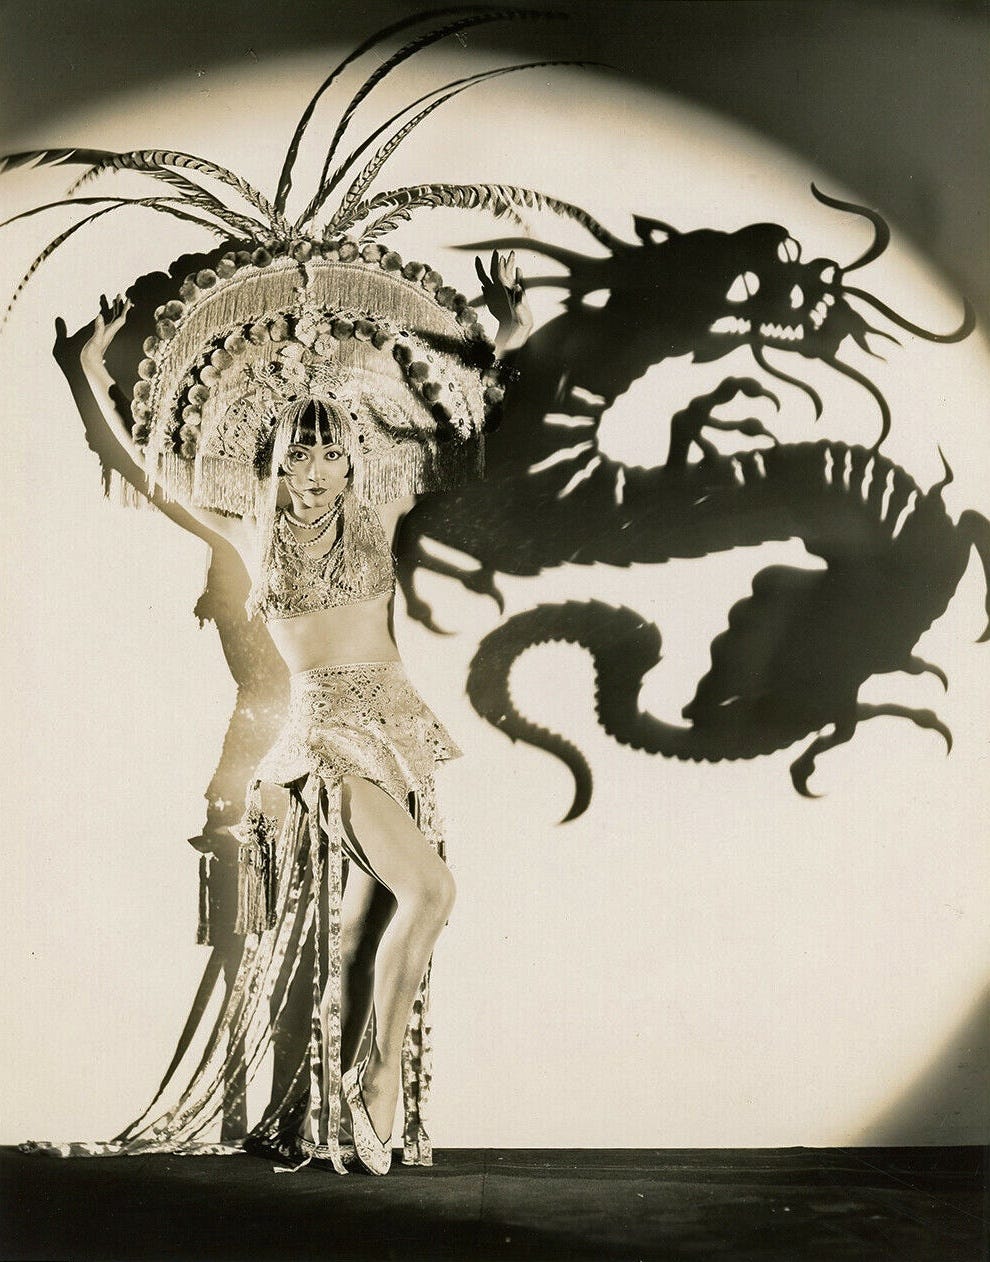 Anna May Wong poses against a wall in a shimmering showgirl outfit with a magnificent fringe headdress, a shadow of a Chinese dragon is projected onto the wall next to her